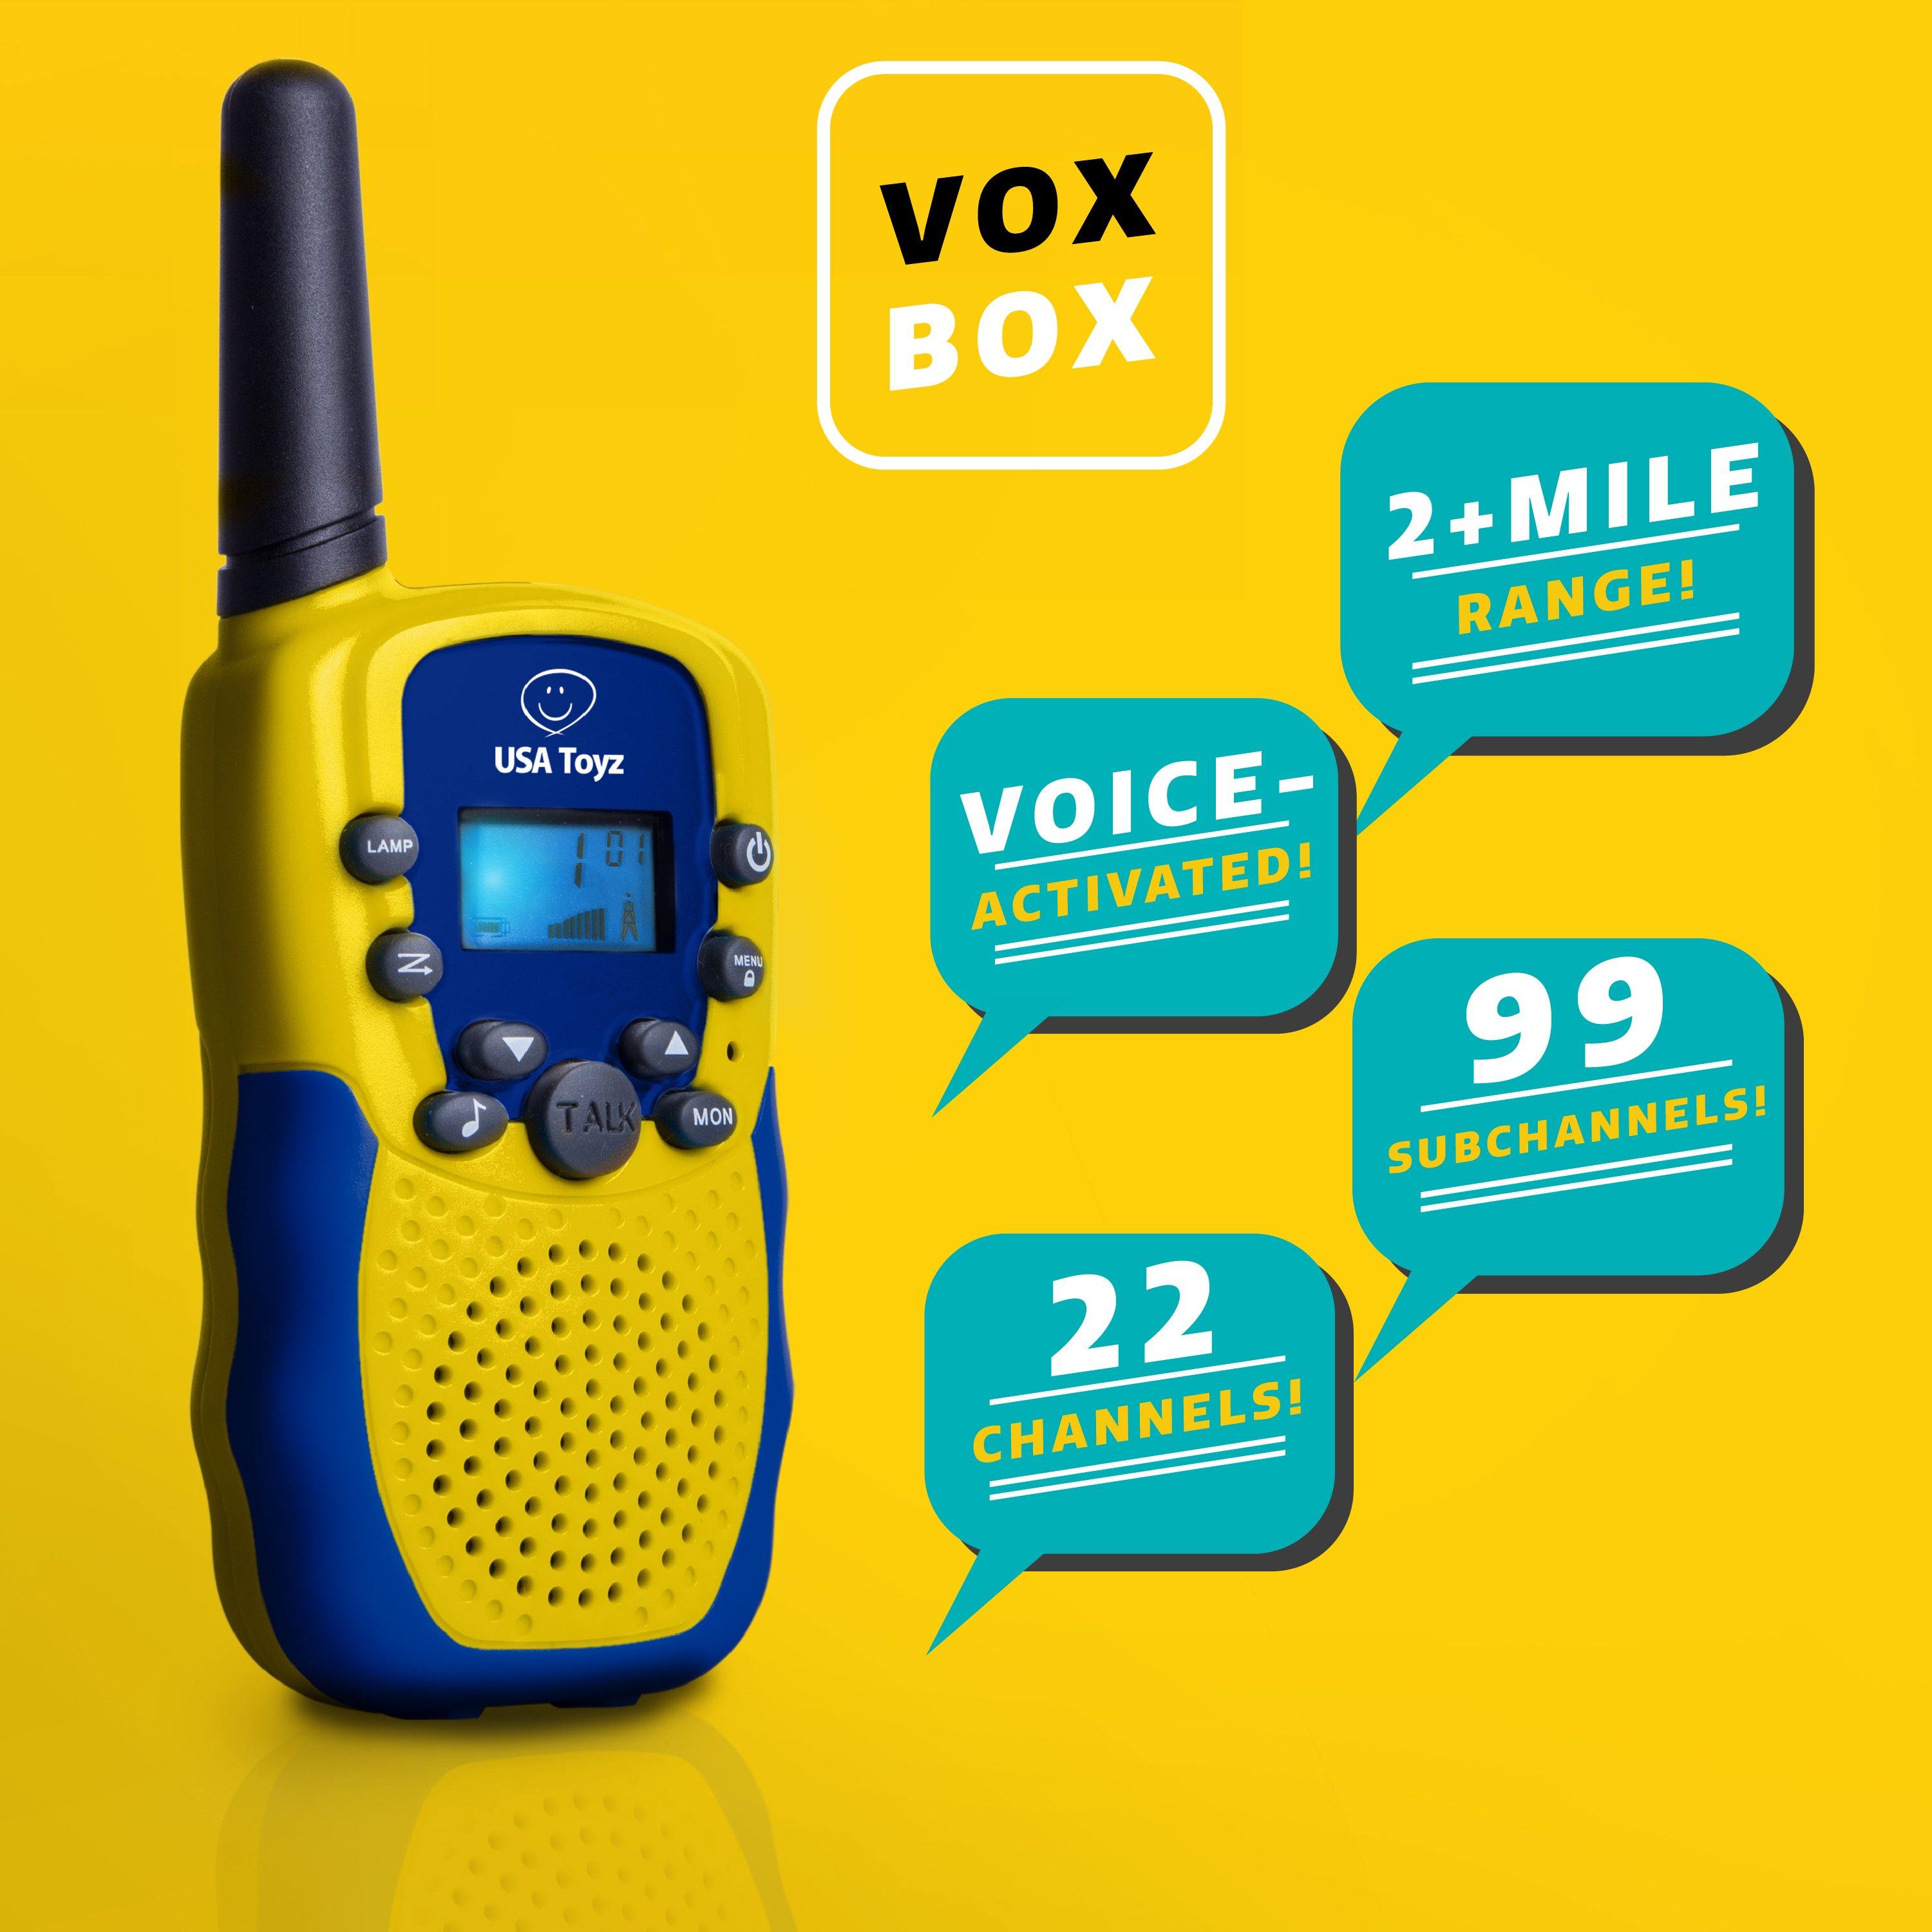 Vox Box Walkie Talkies 2 Mile Range Voice Activated 22 Channels Blue & Yellow 